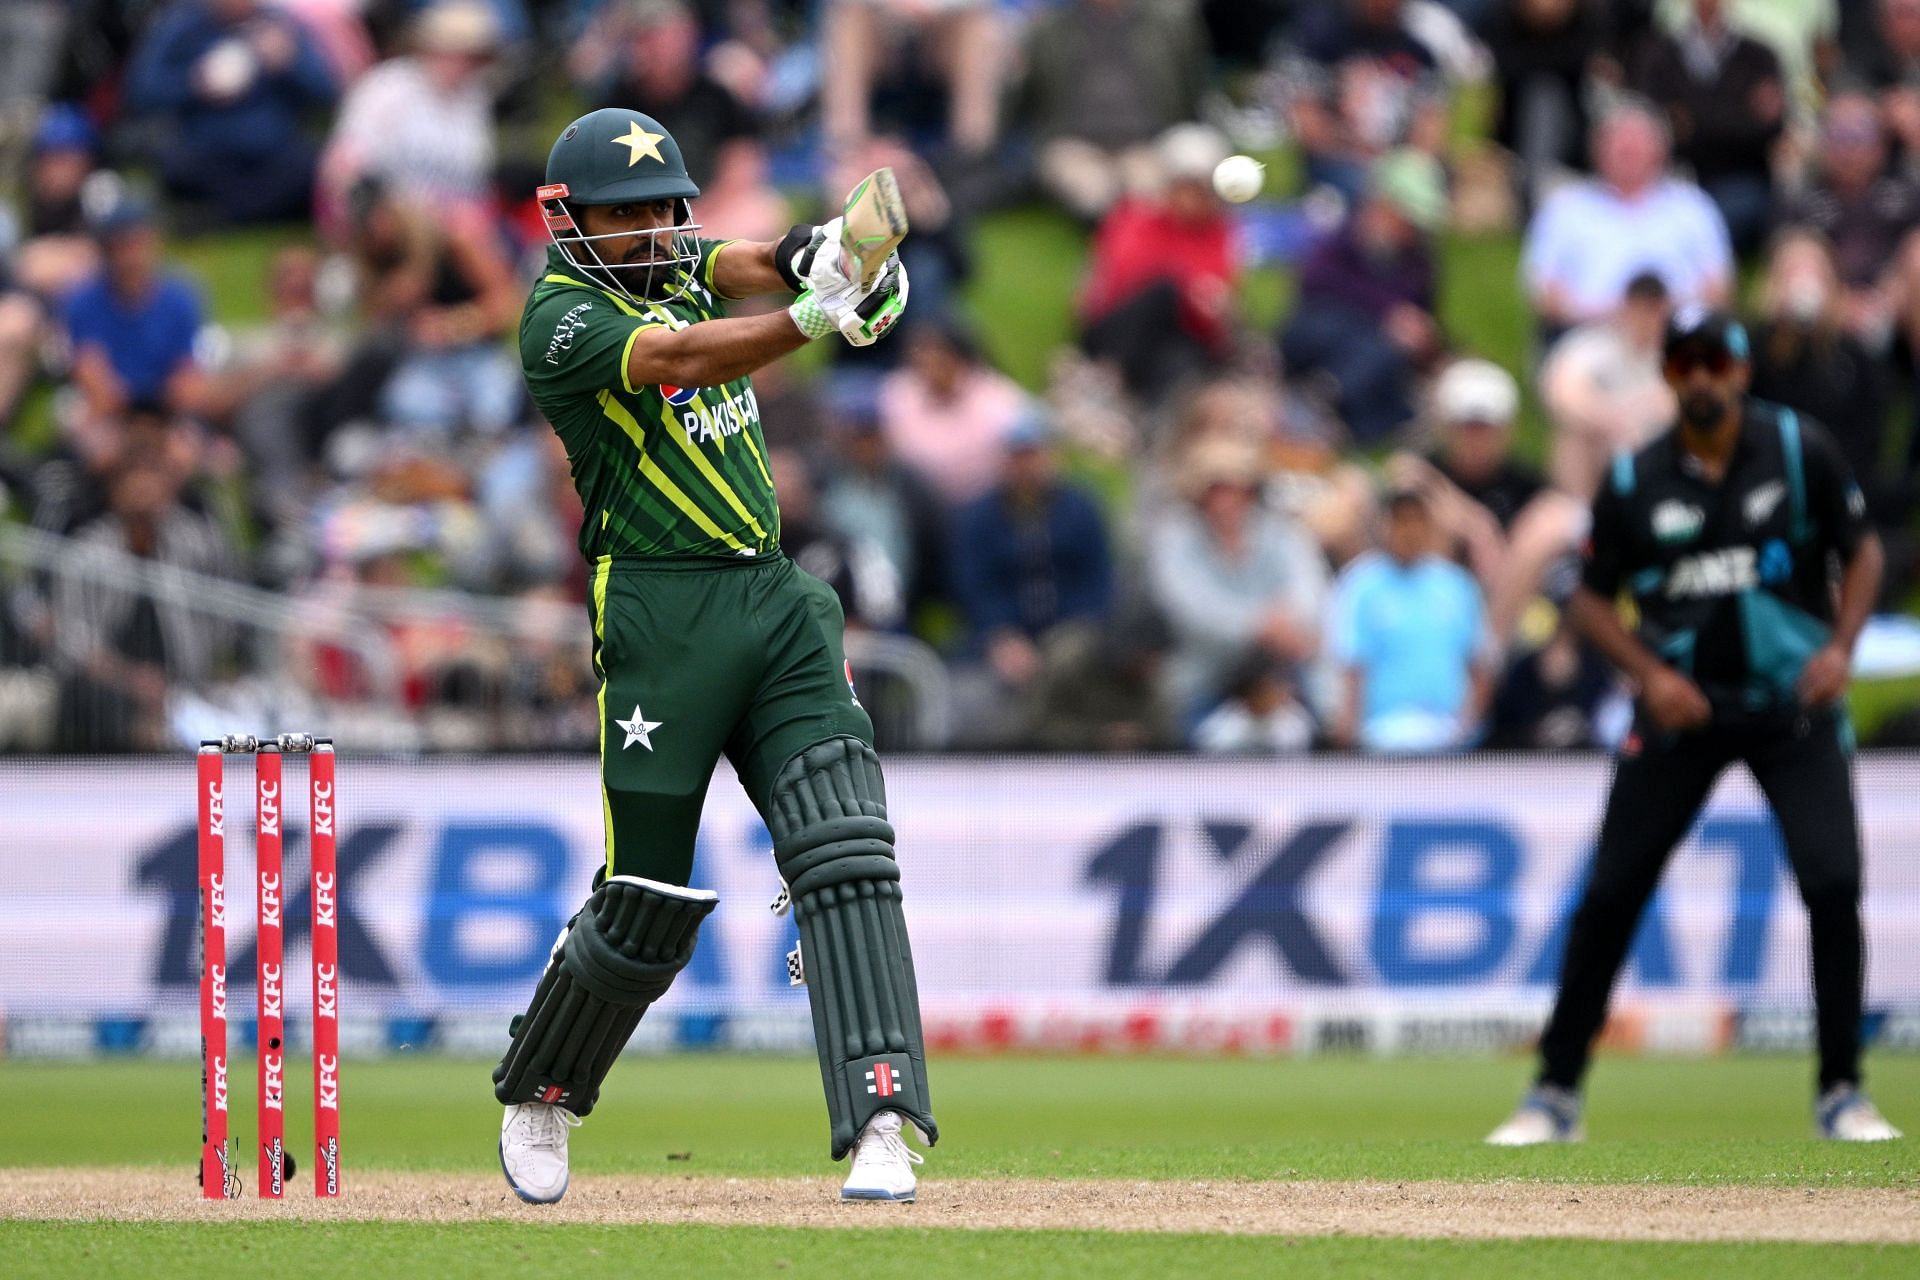 Babar Azam has played several match-winning knocks in all three formats.